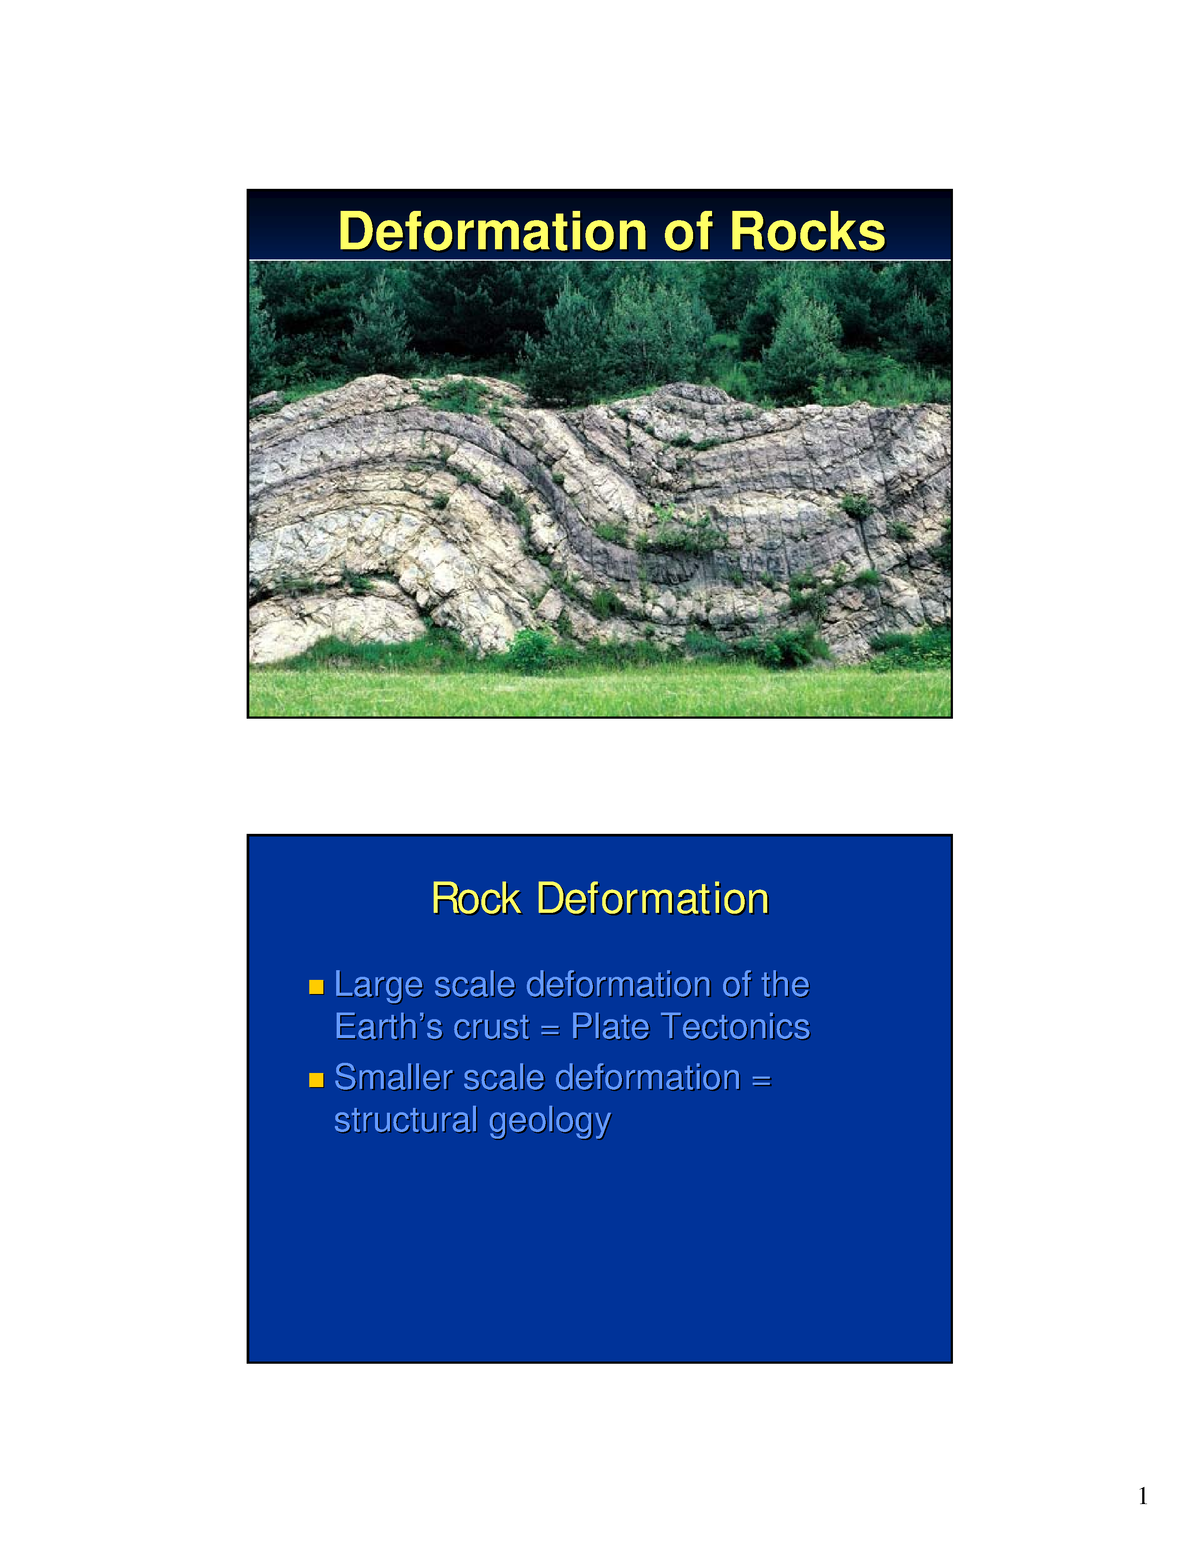 Sept30 Ch 10 Lecture Deformation Of Rocks Deformation Of Rocks Rock Deformation Rock 3044